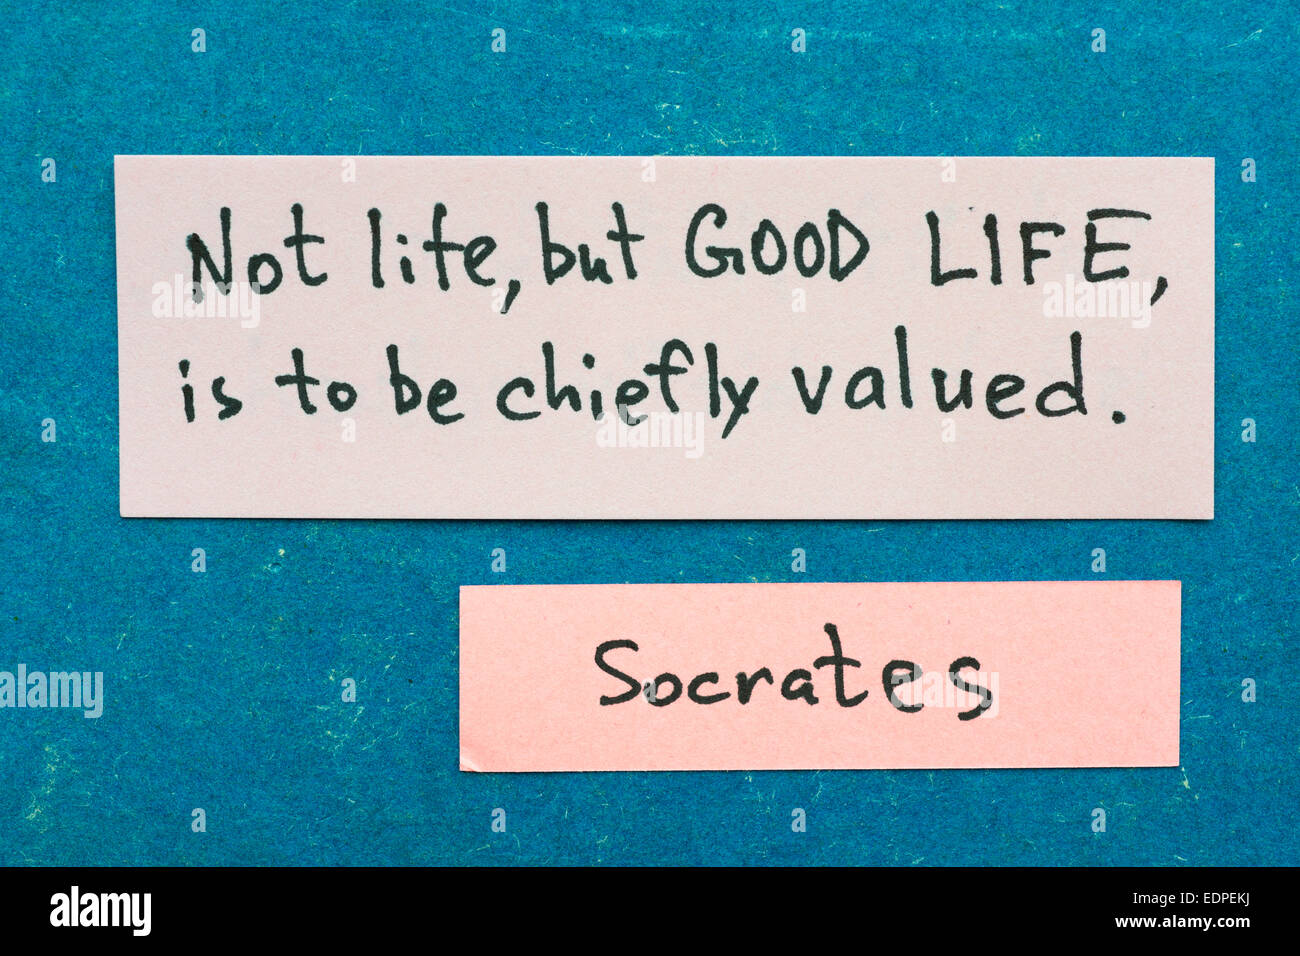 famous ancient Greek philosopher Socrates quote interpretation with sticky notes on vintage carton board about better life Stock Photo